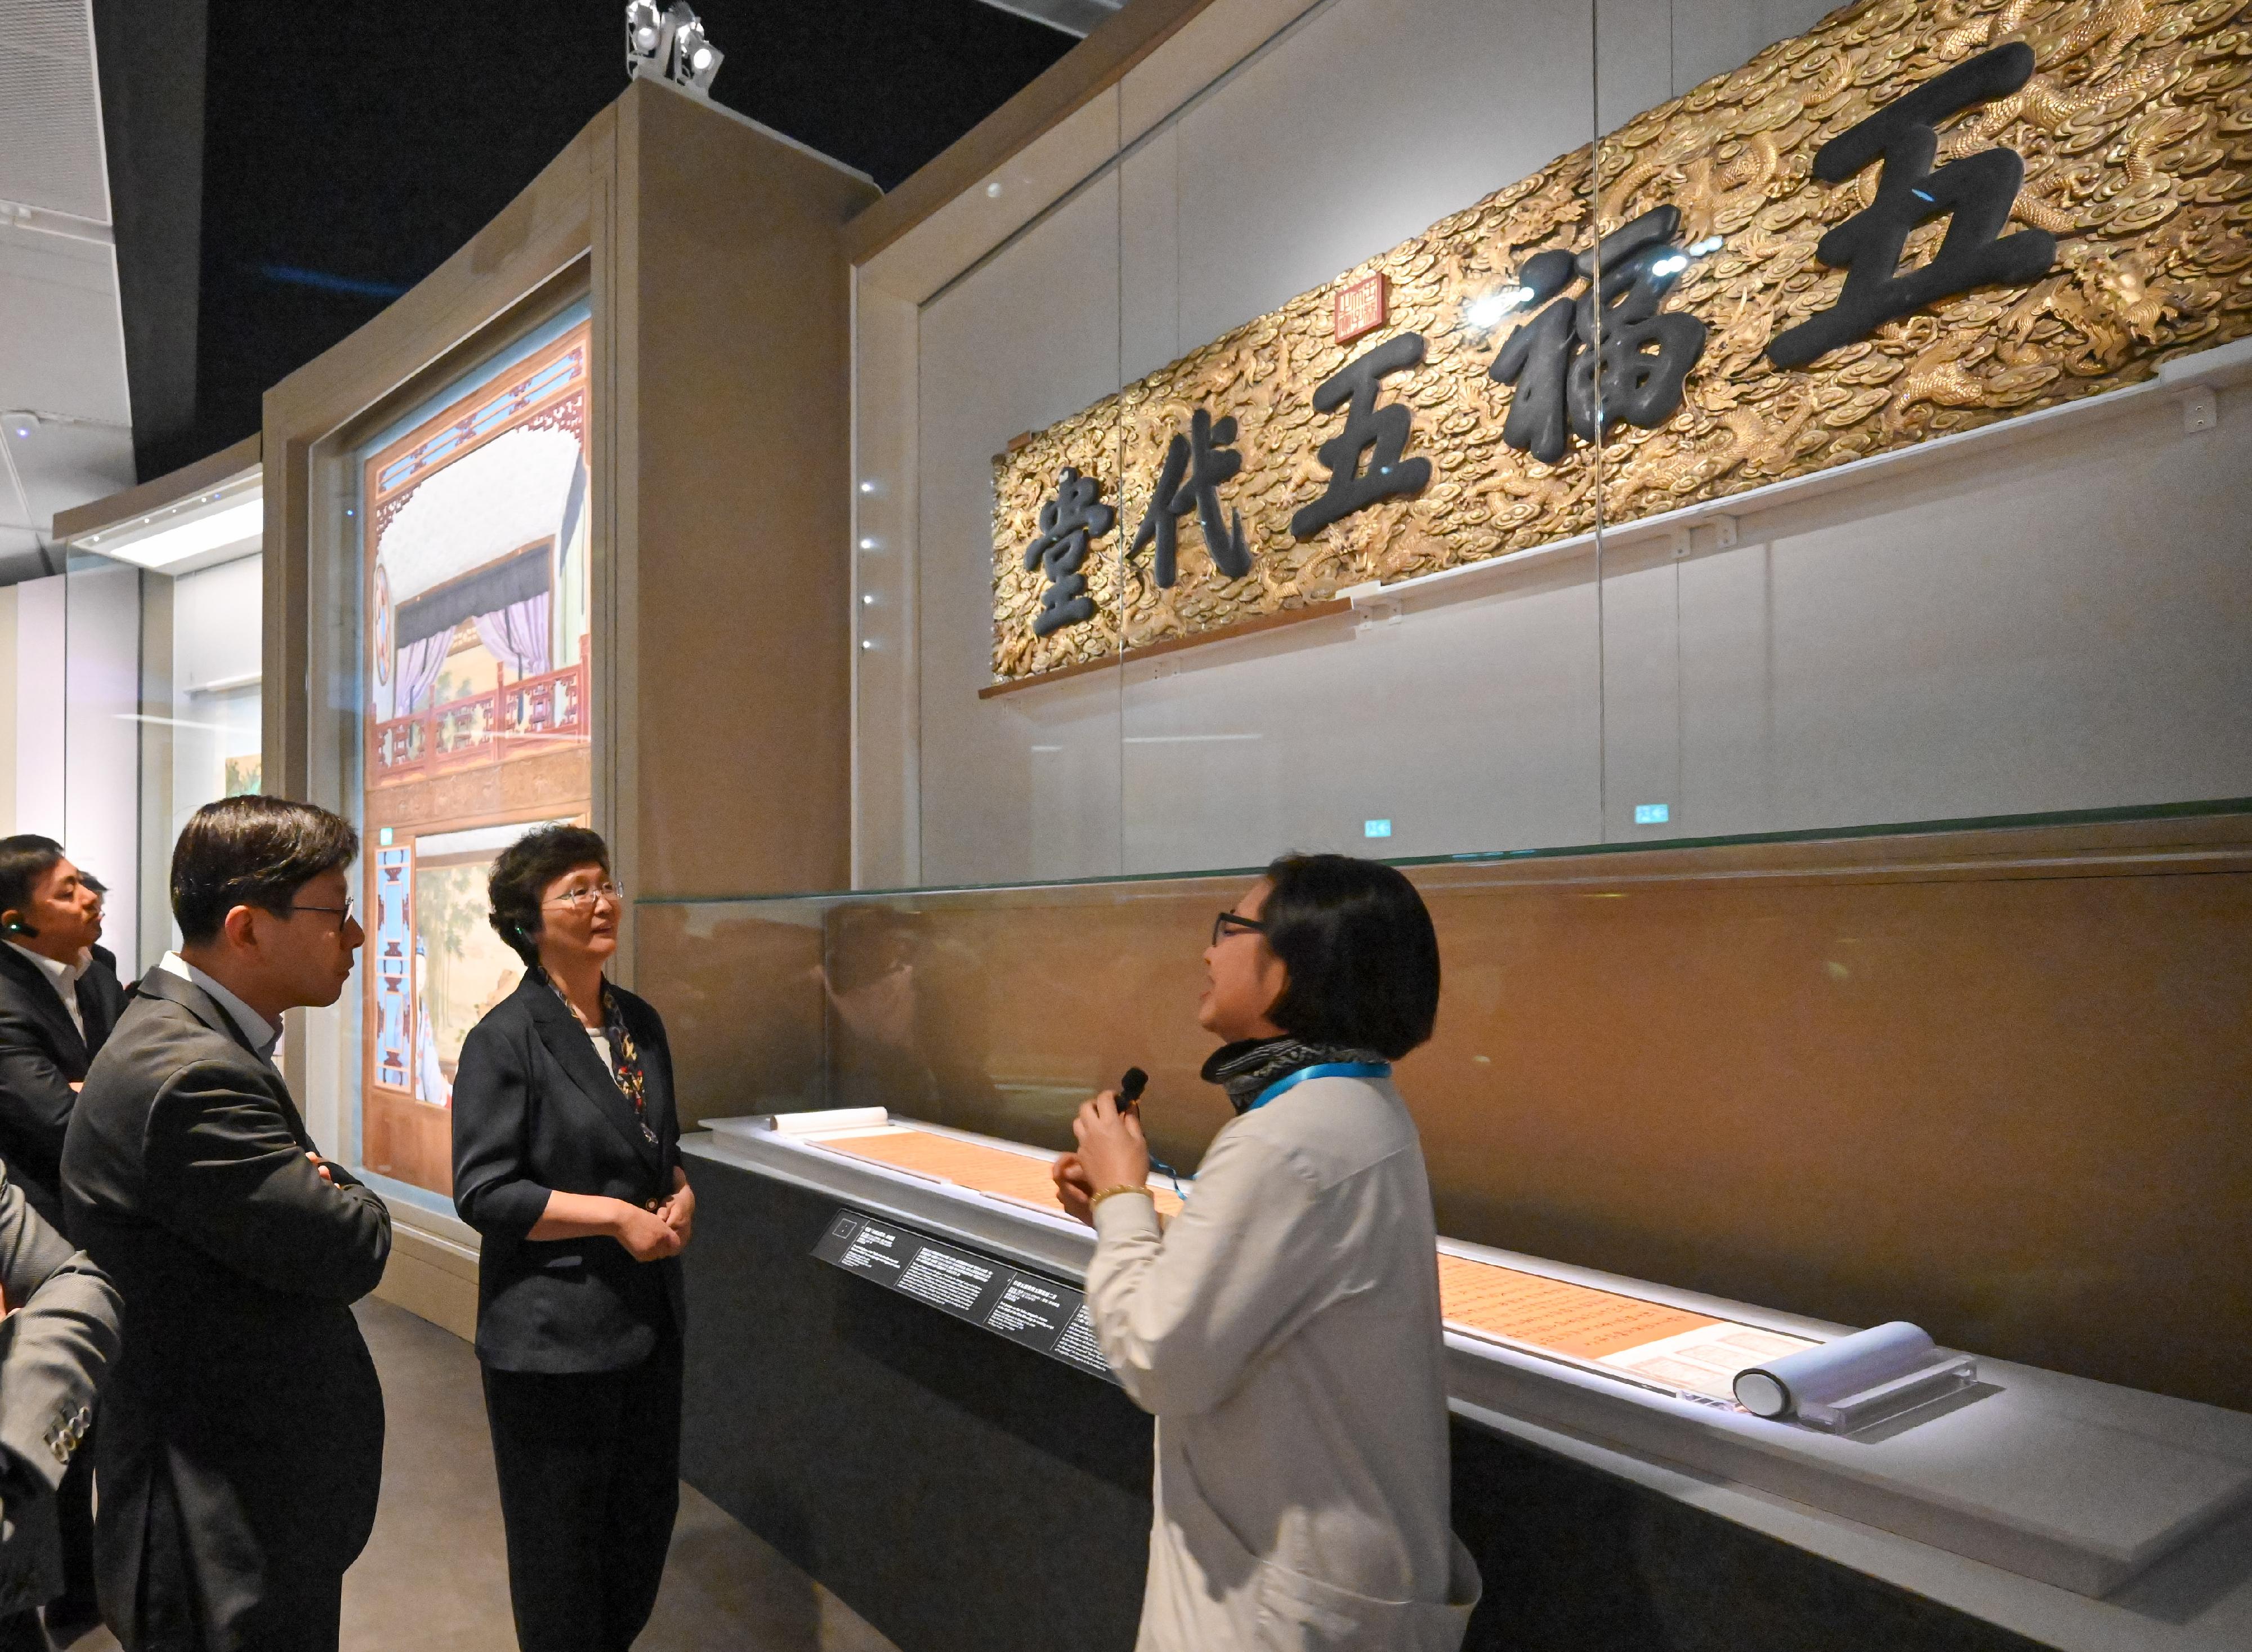 The Minister of Human Resources and Social Security, Ms Wang Xiaoping, visited the "YUAN MING YUAN - Art and Culture of an Imperial Garden-Palace" exhibition at the Hong Kong Palace Museum yesterday (May 6). The Chief Secretary for Administration, Mr Chan Kwok-ki, hosted a welcome dinner for Ms Wang as well as officials, guests and speakers visiting Hong Kong for the Global Talent Summit · Hong Kong. Photo shows Ms Wang (centre), accompanied by the Secretary for Labour and Welfare, Mr Chris Sun (left), touring the exhibition.